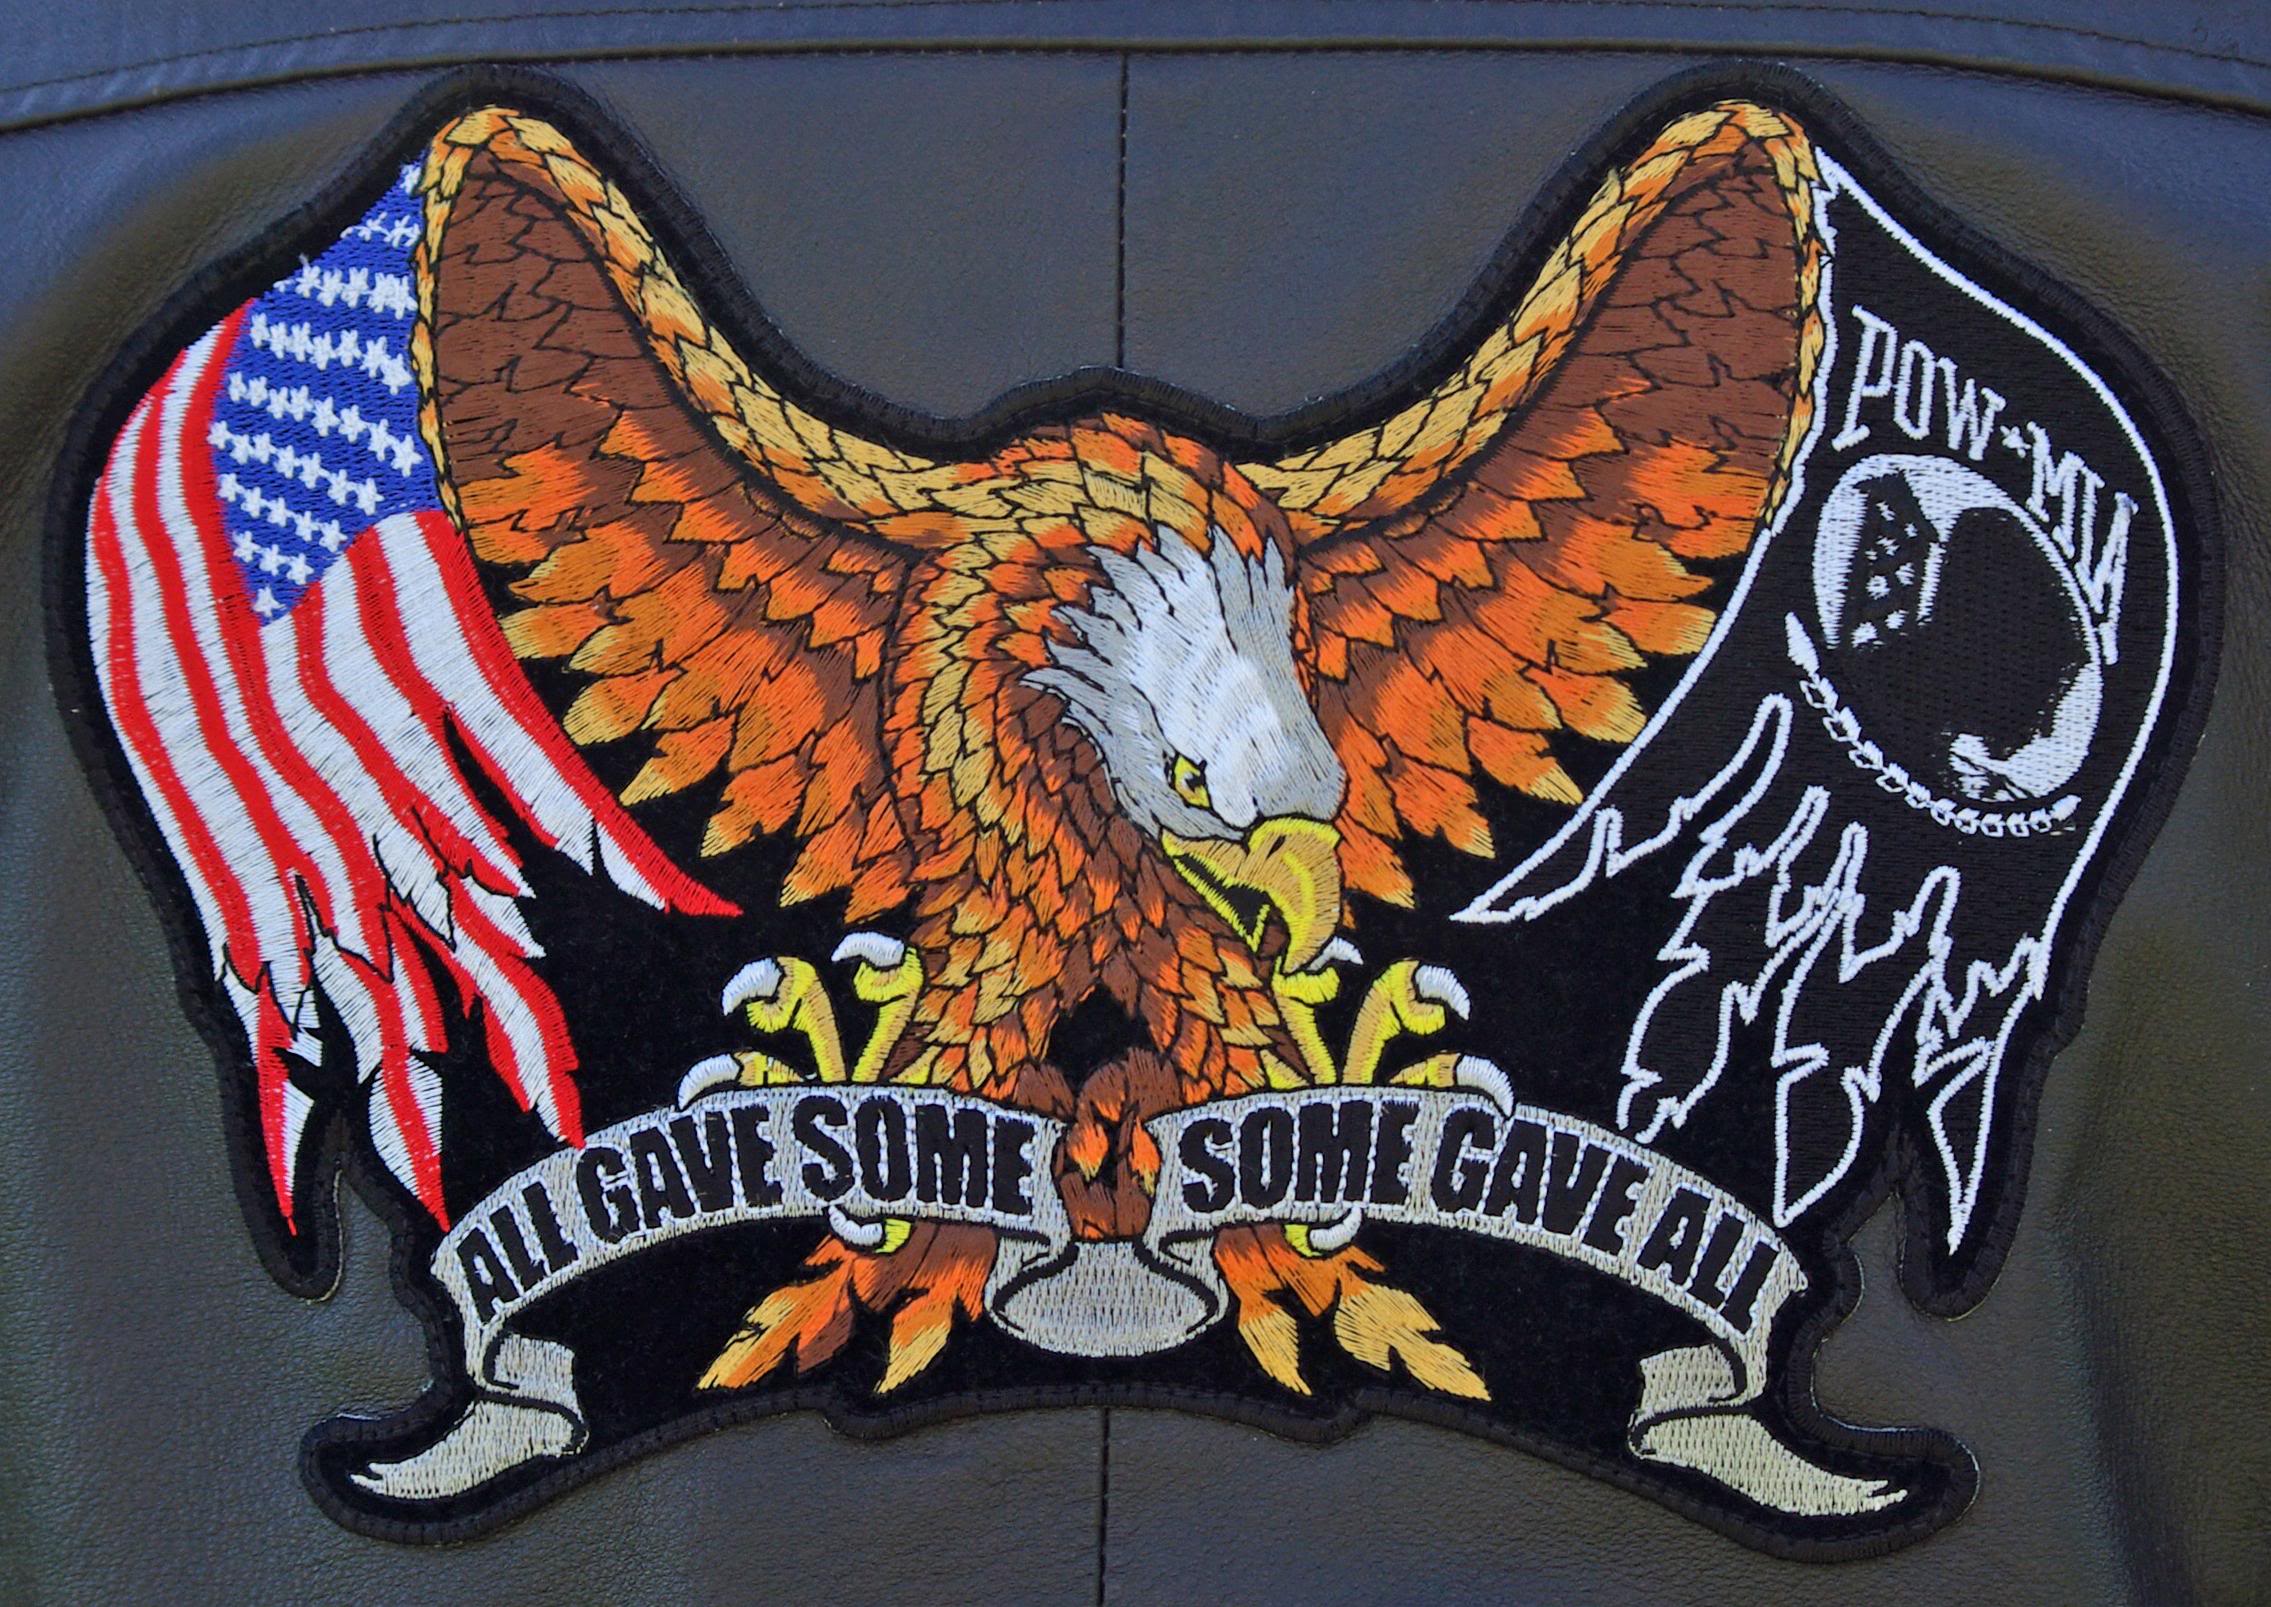 All Gave Some – Some Gave All